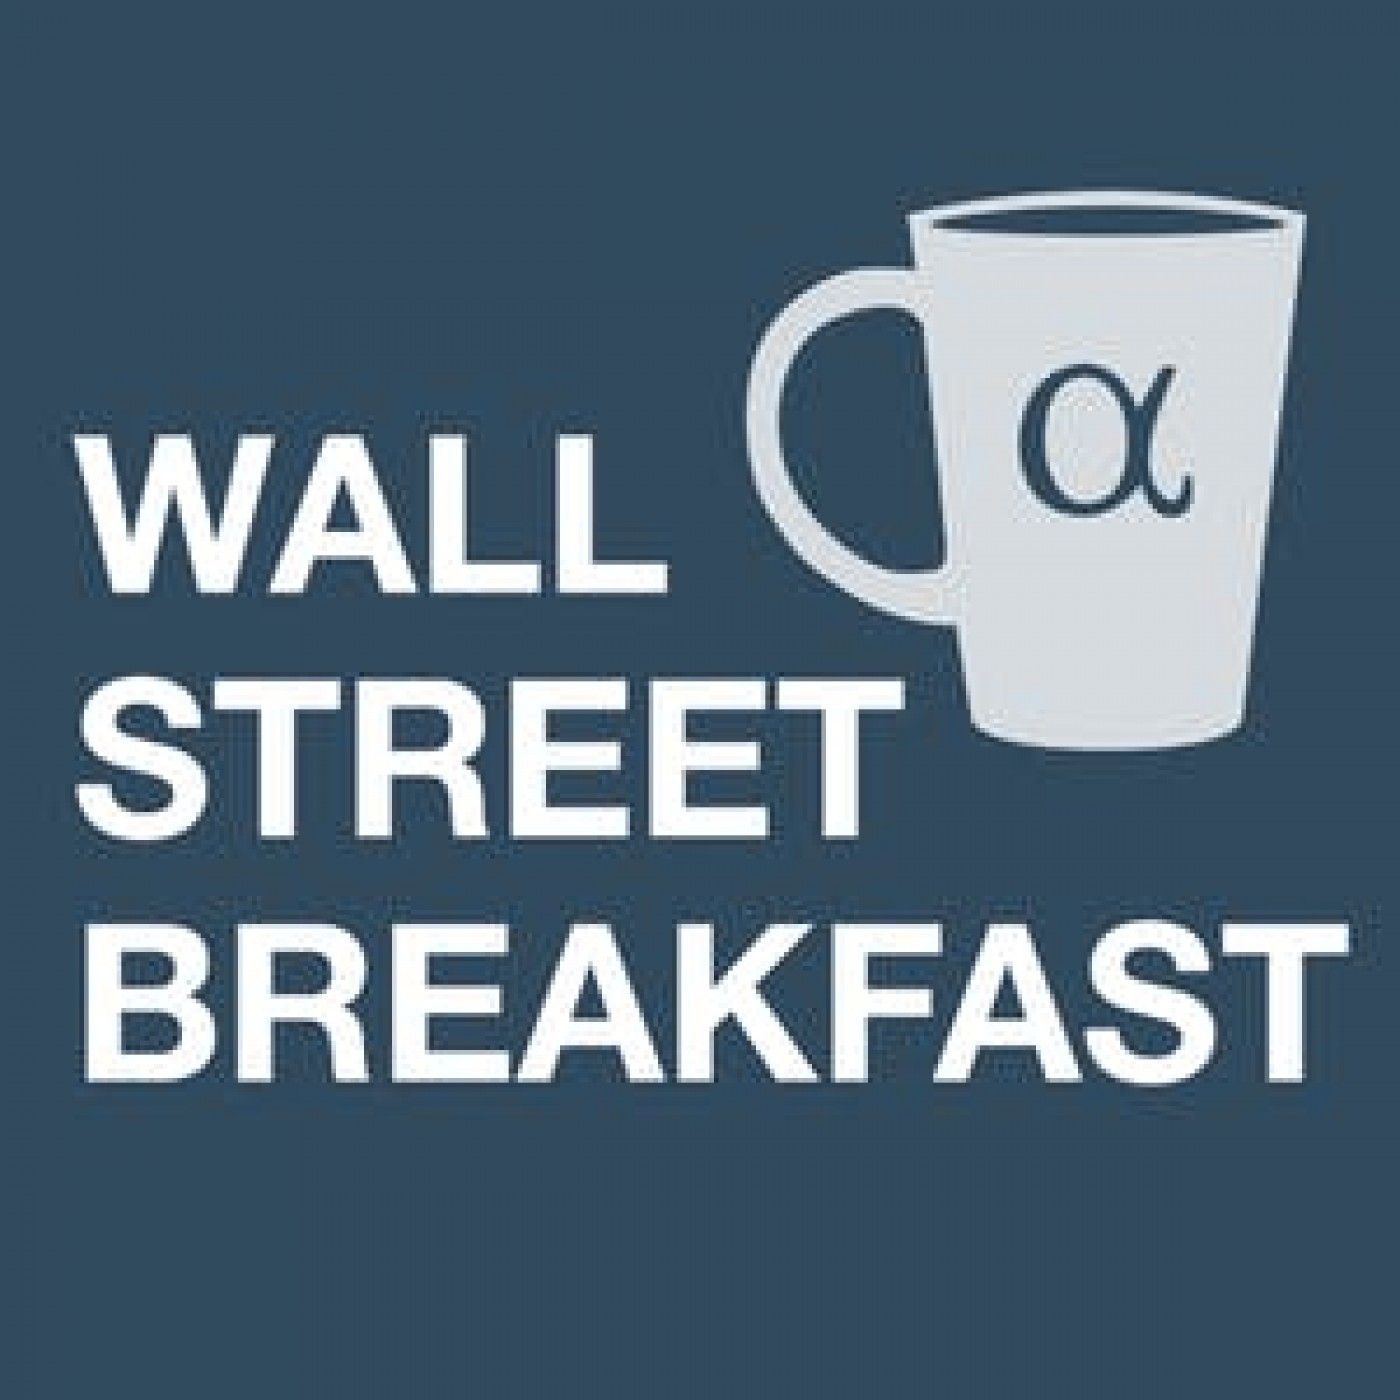 Wall Street Breakfast July 13: White House Seeks to 'Provide Context' Before CPI Report is Released